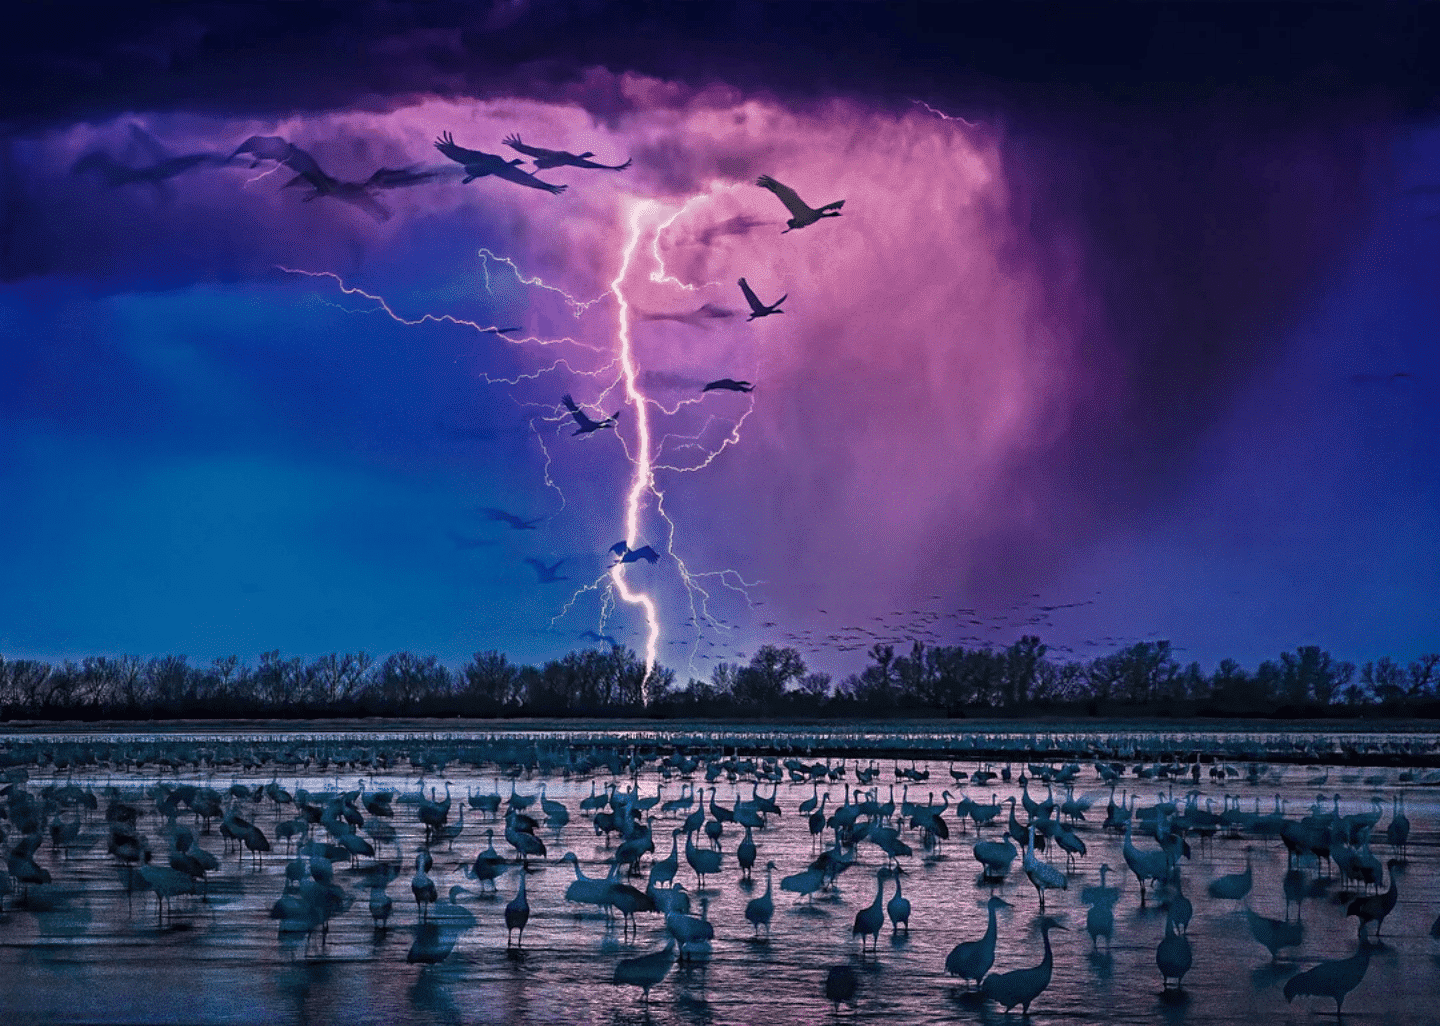 A group of snadhill cranes in the water as purple lightning strikes 